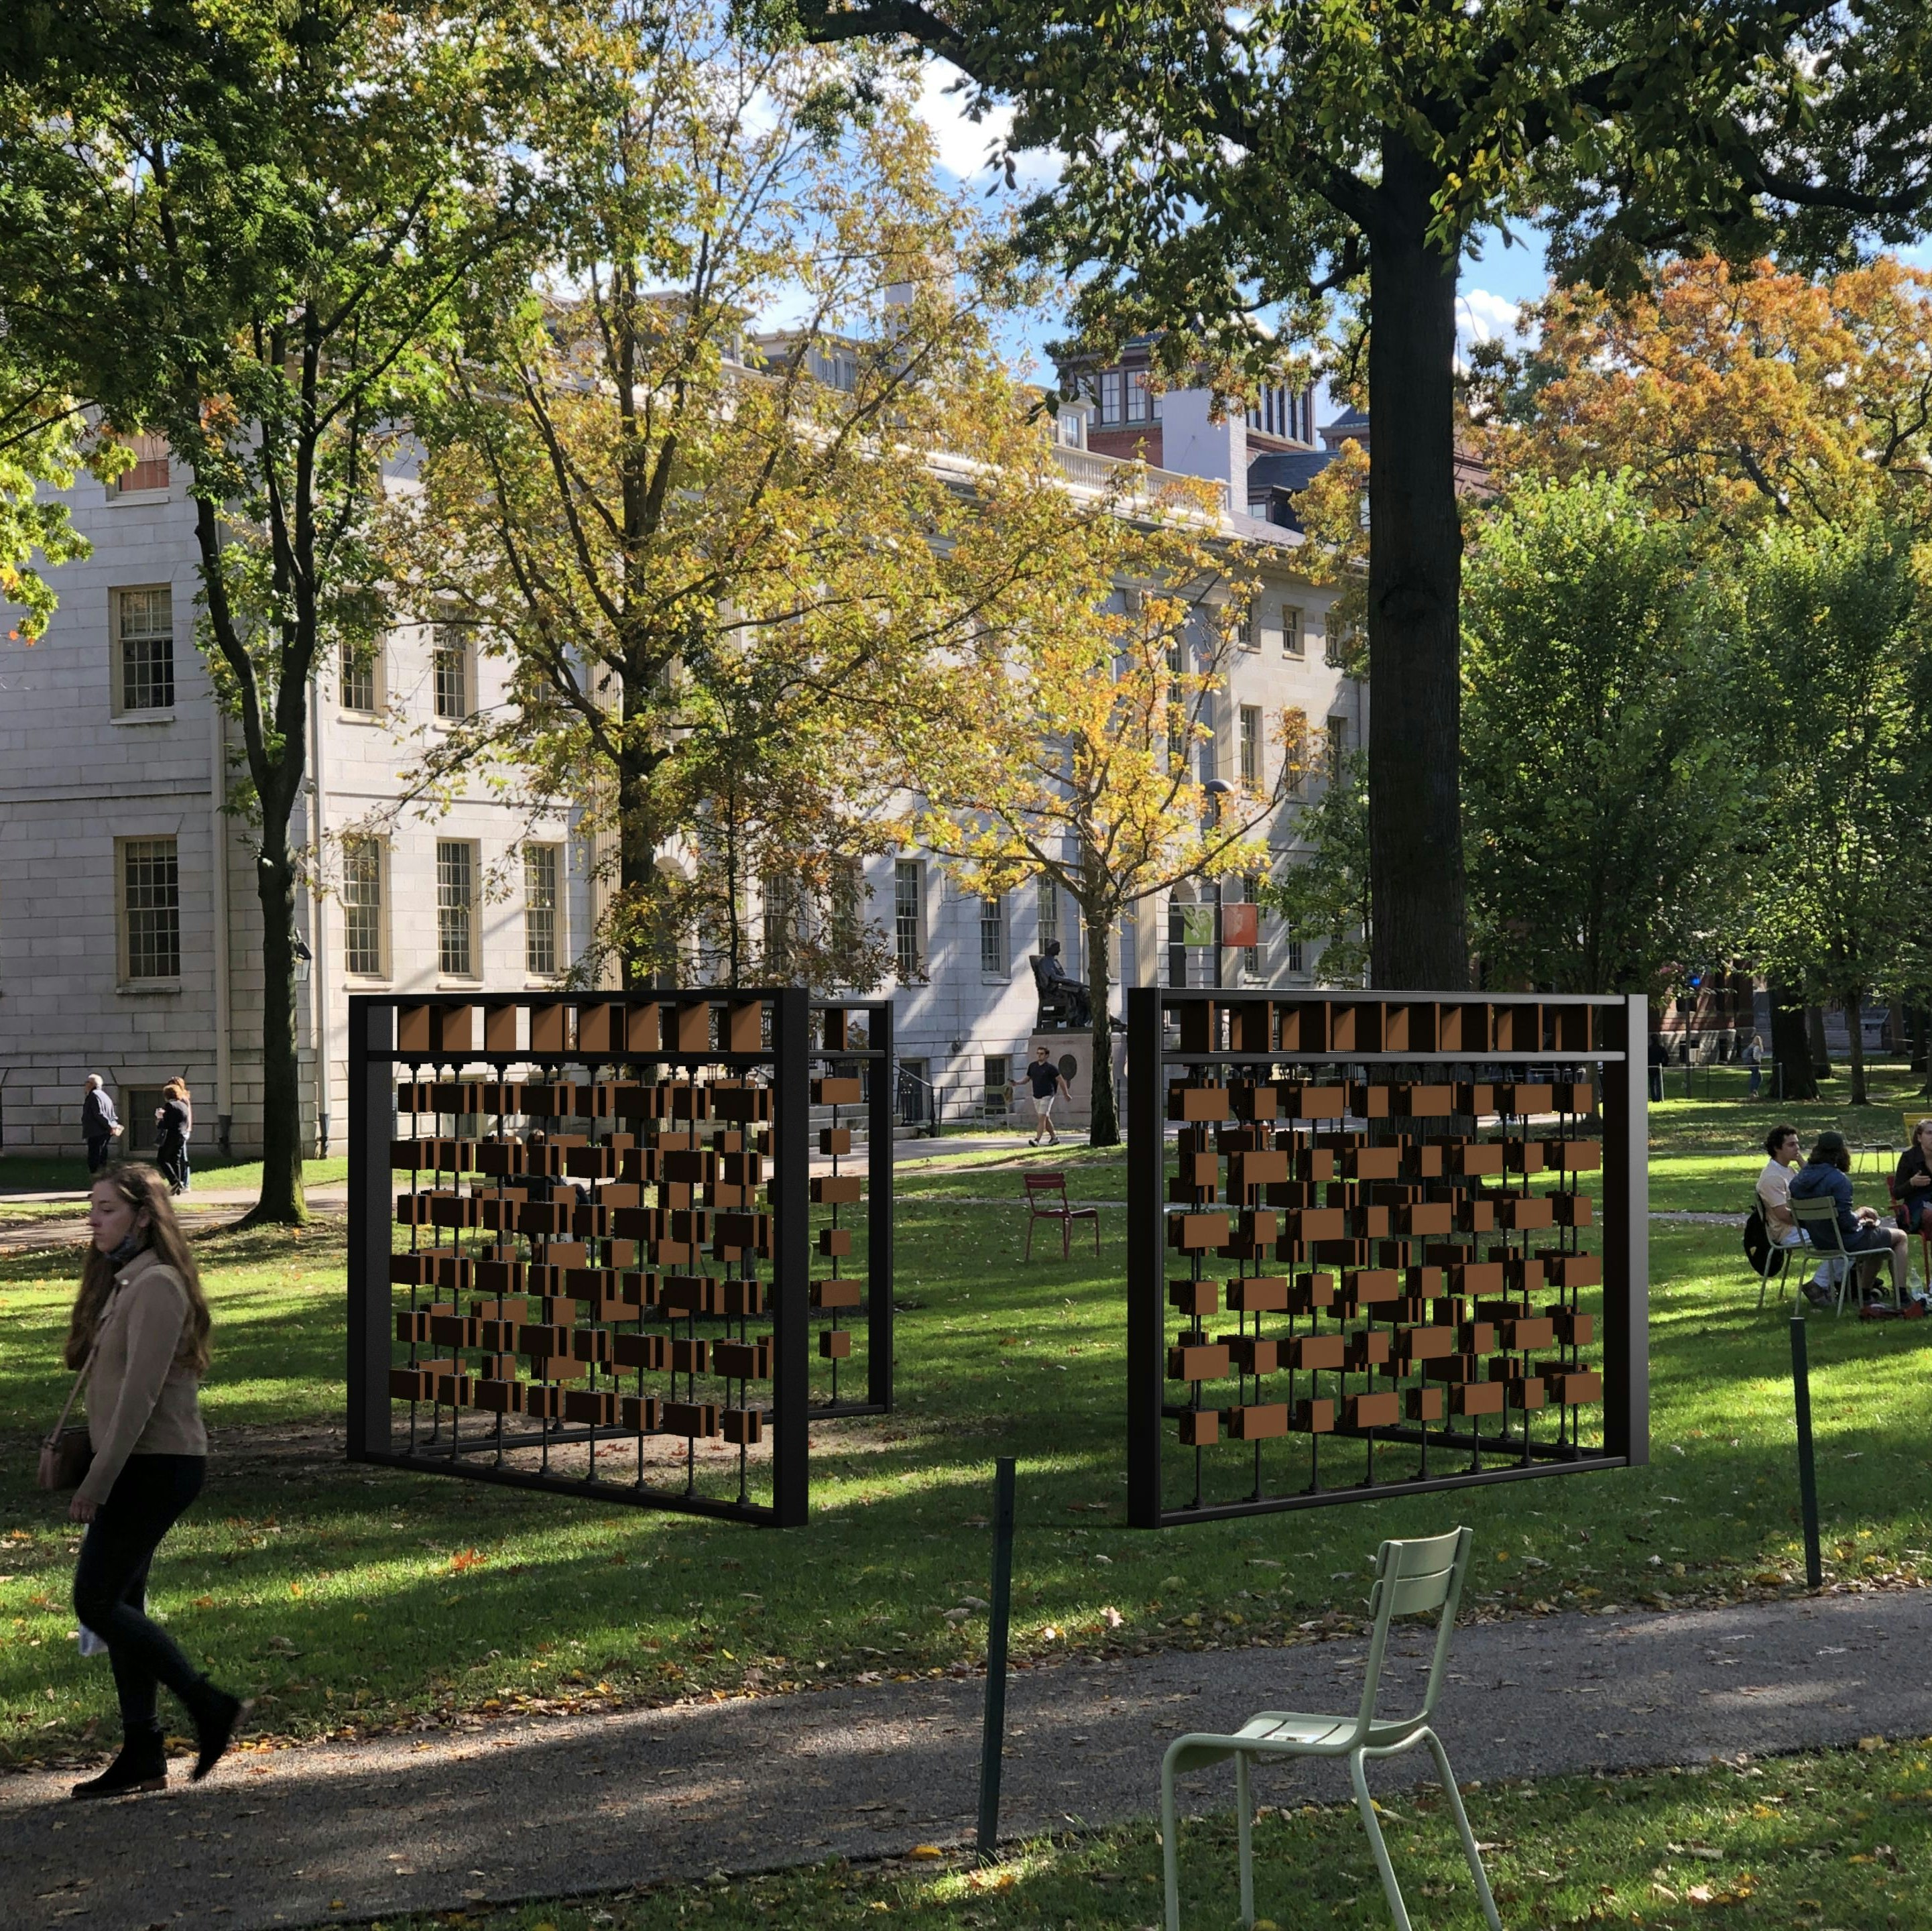 A rendering of student-designed public art to be installed this April in Harvard's Old Yard.